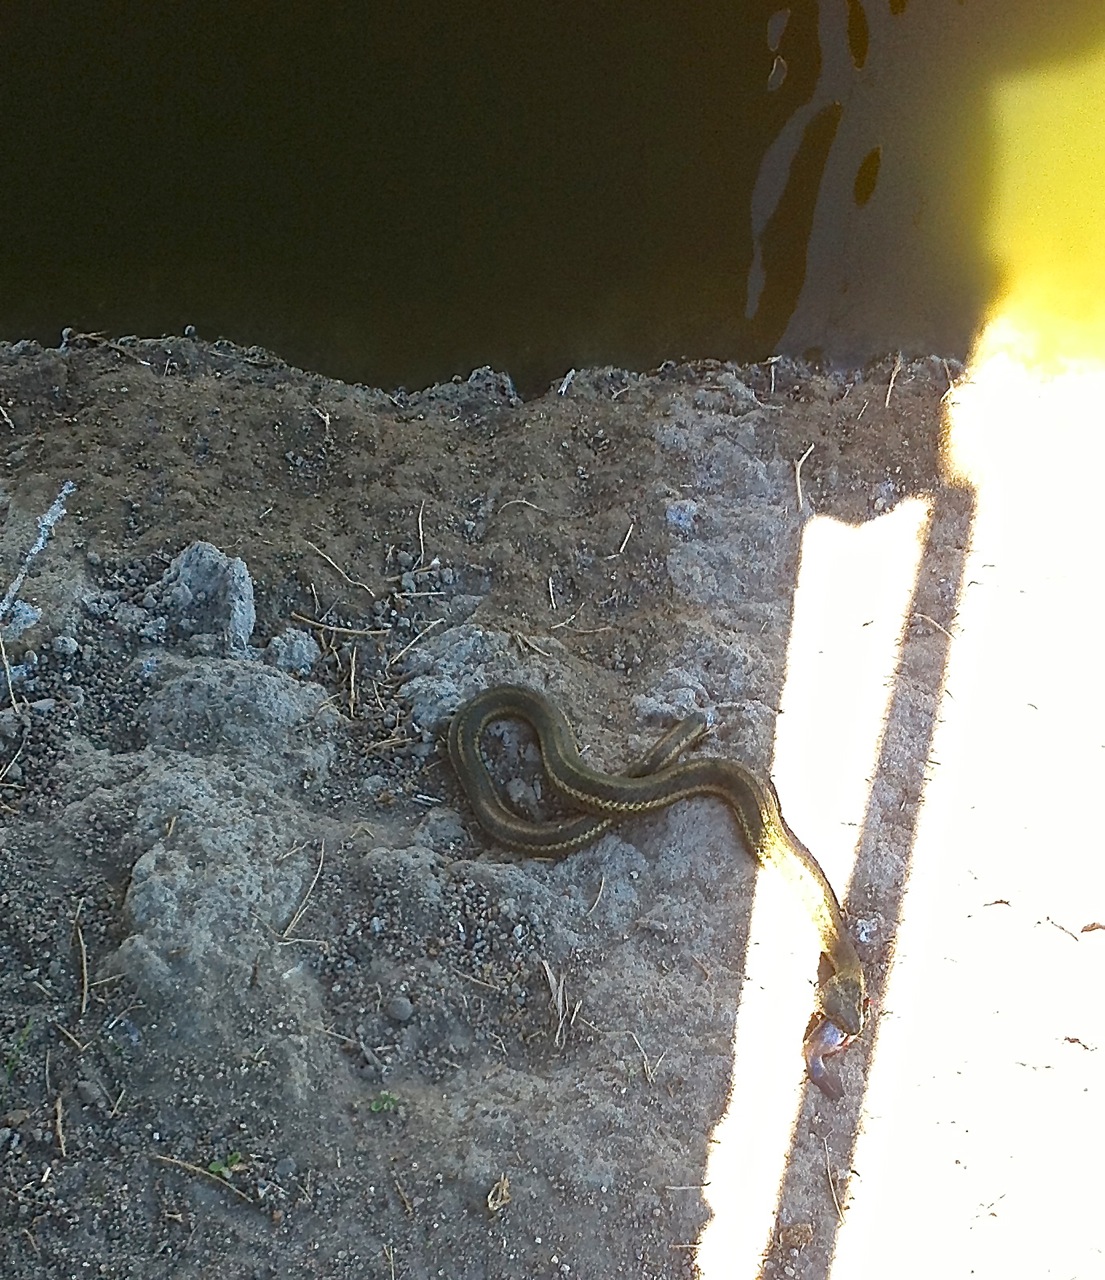 a giant garter snake in the dirt with part of a fish carcass stuck in its mouth